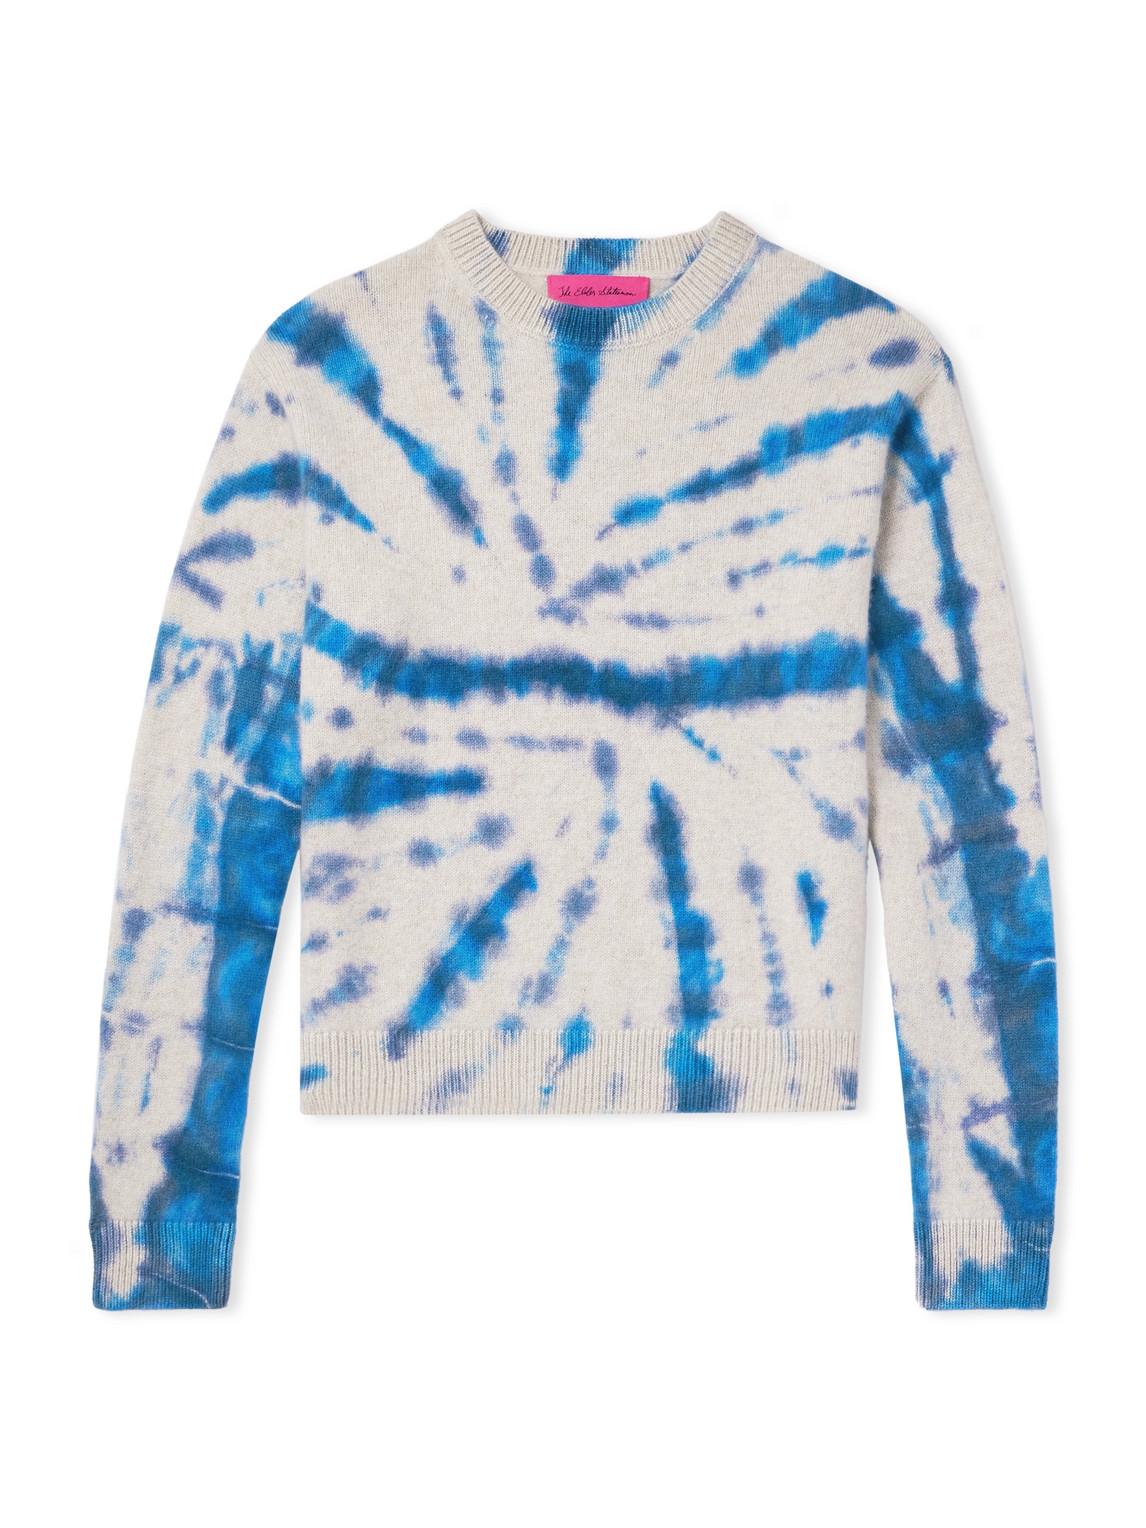 Burnout Tie-Dyed Cashmere Sweater